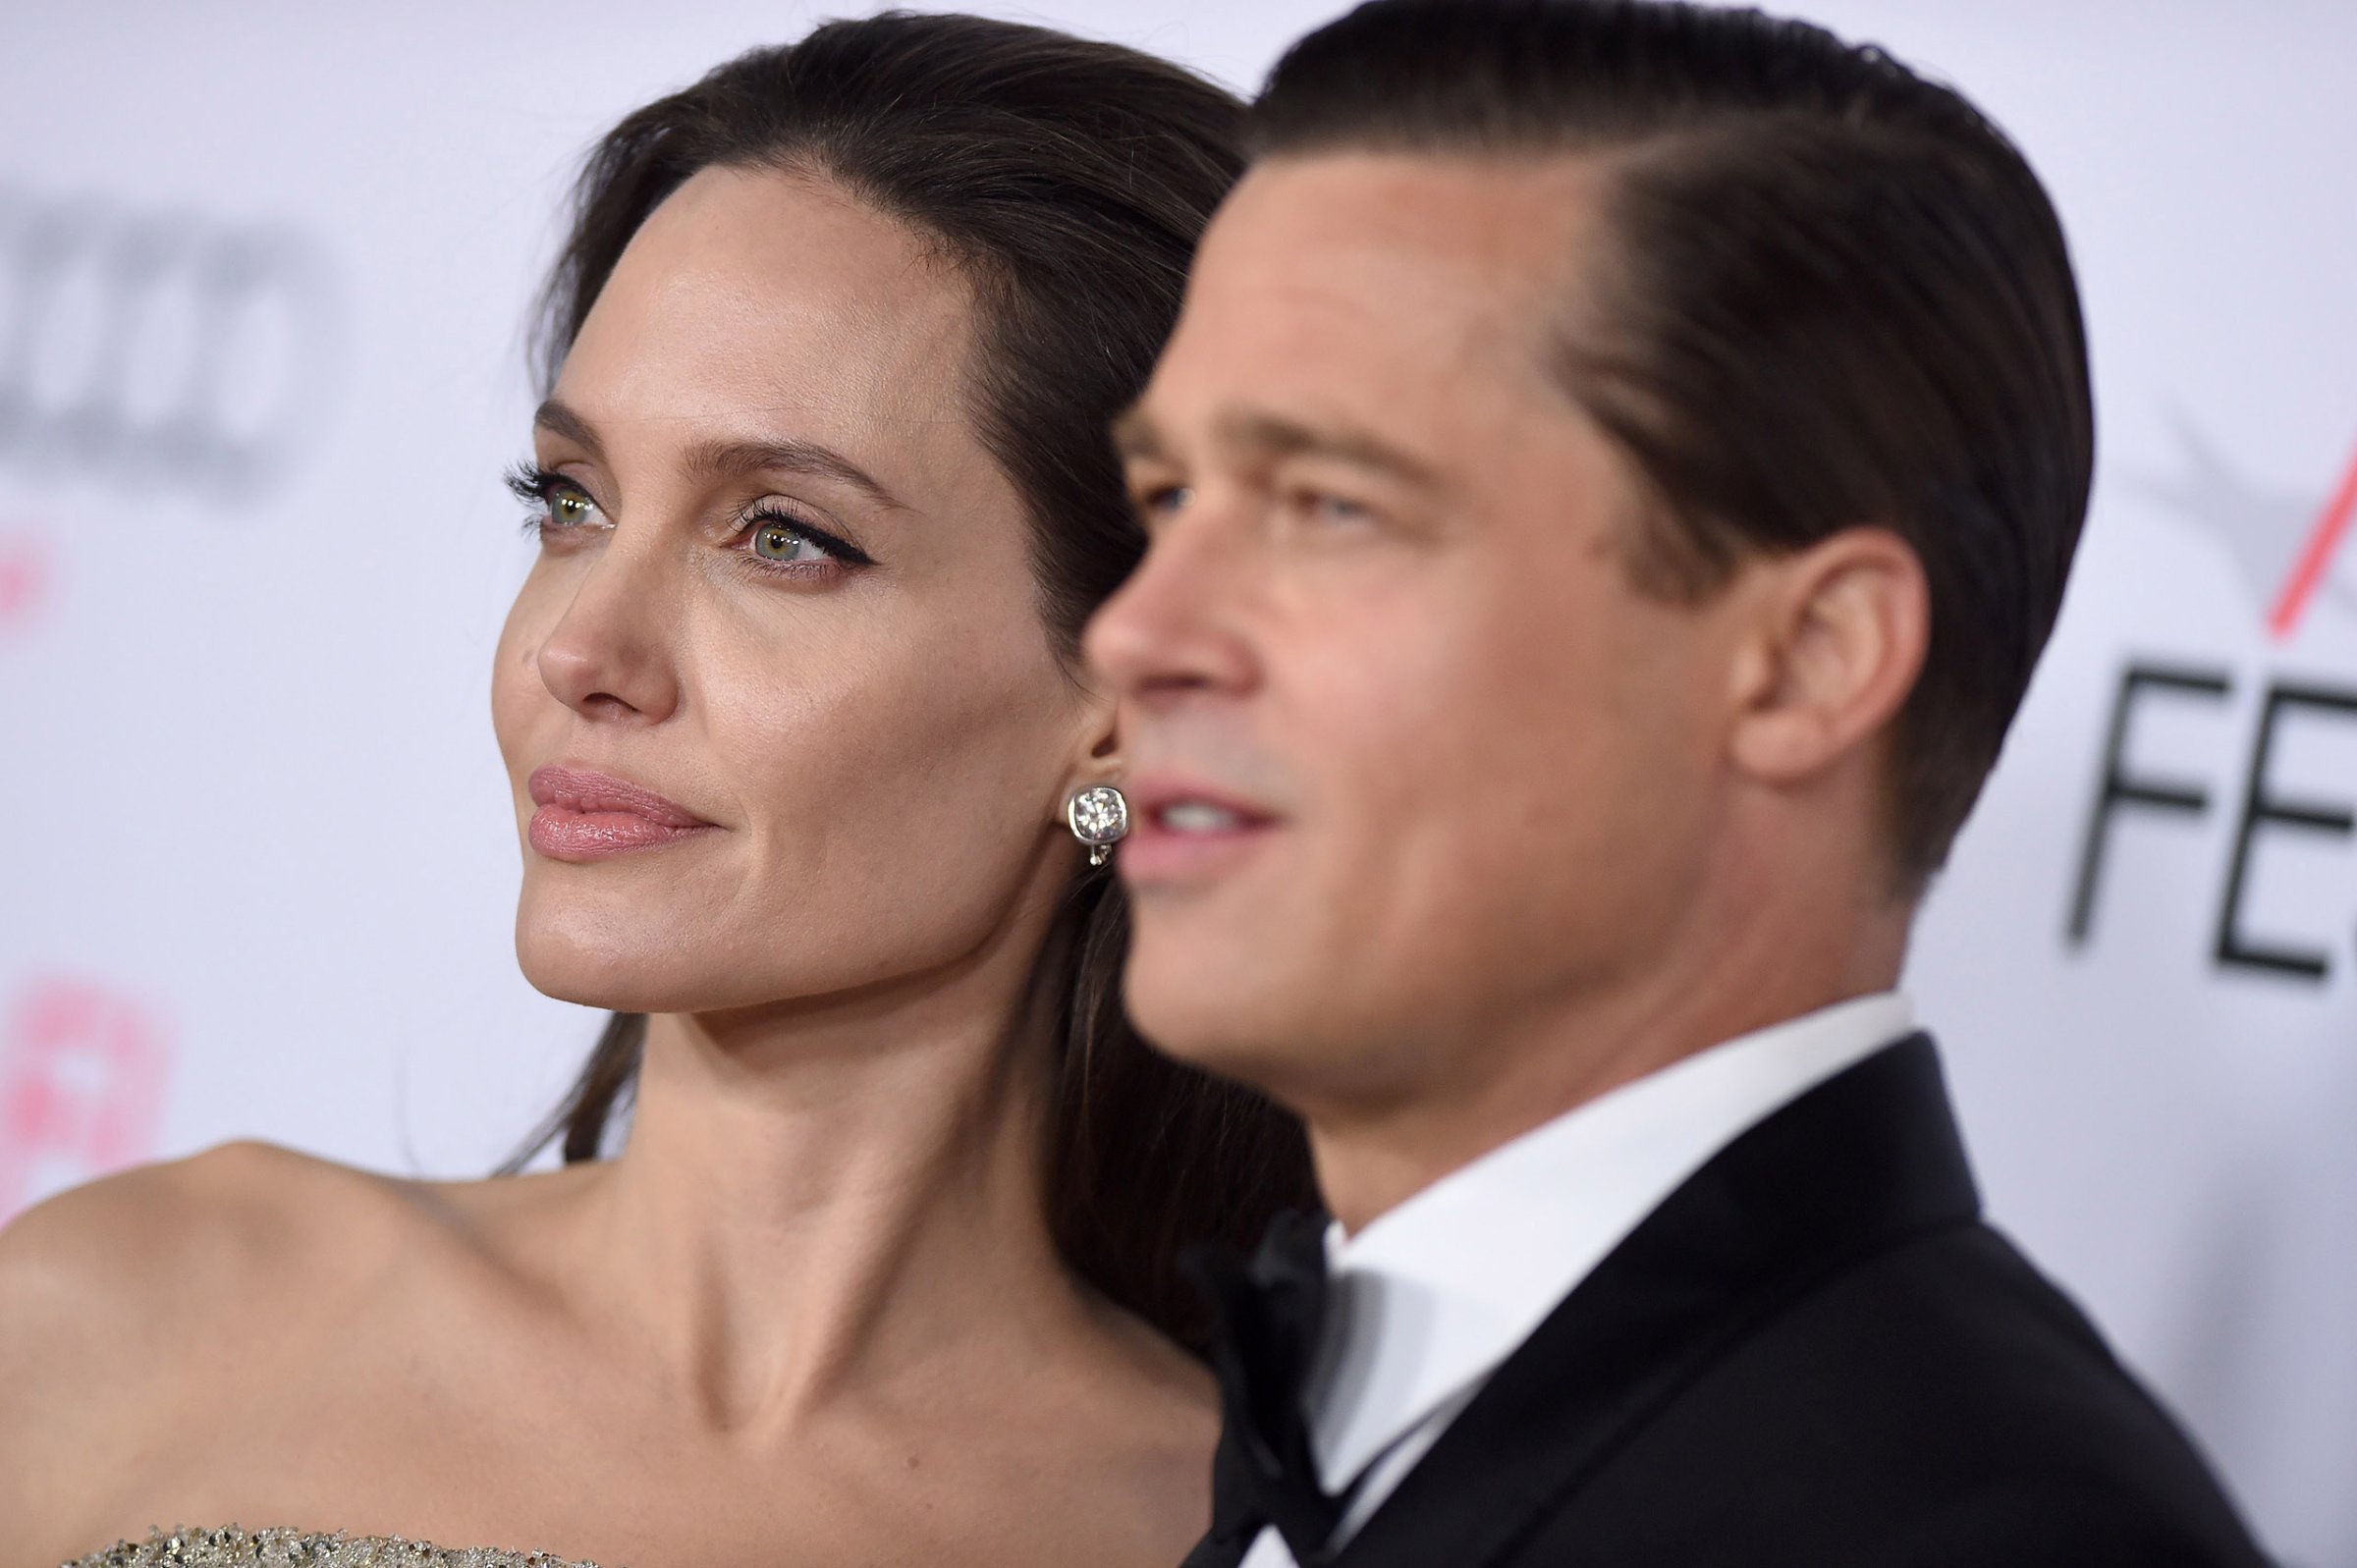 Angelina Jolie and Brad Pitt arrive at the AFI FEST 2015 Opening Night Gala Premiere of Universal Pictures' 'By The Sea' in Hollywood, Calif. on Nov. 5, 2015.